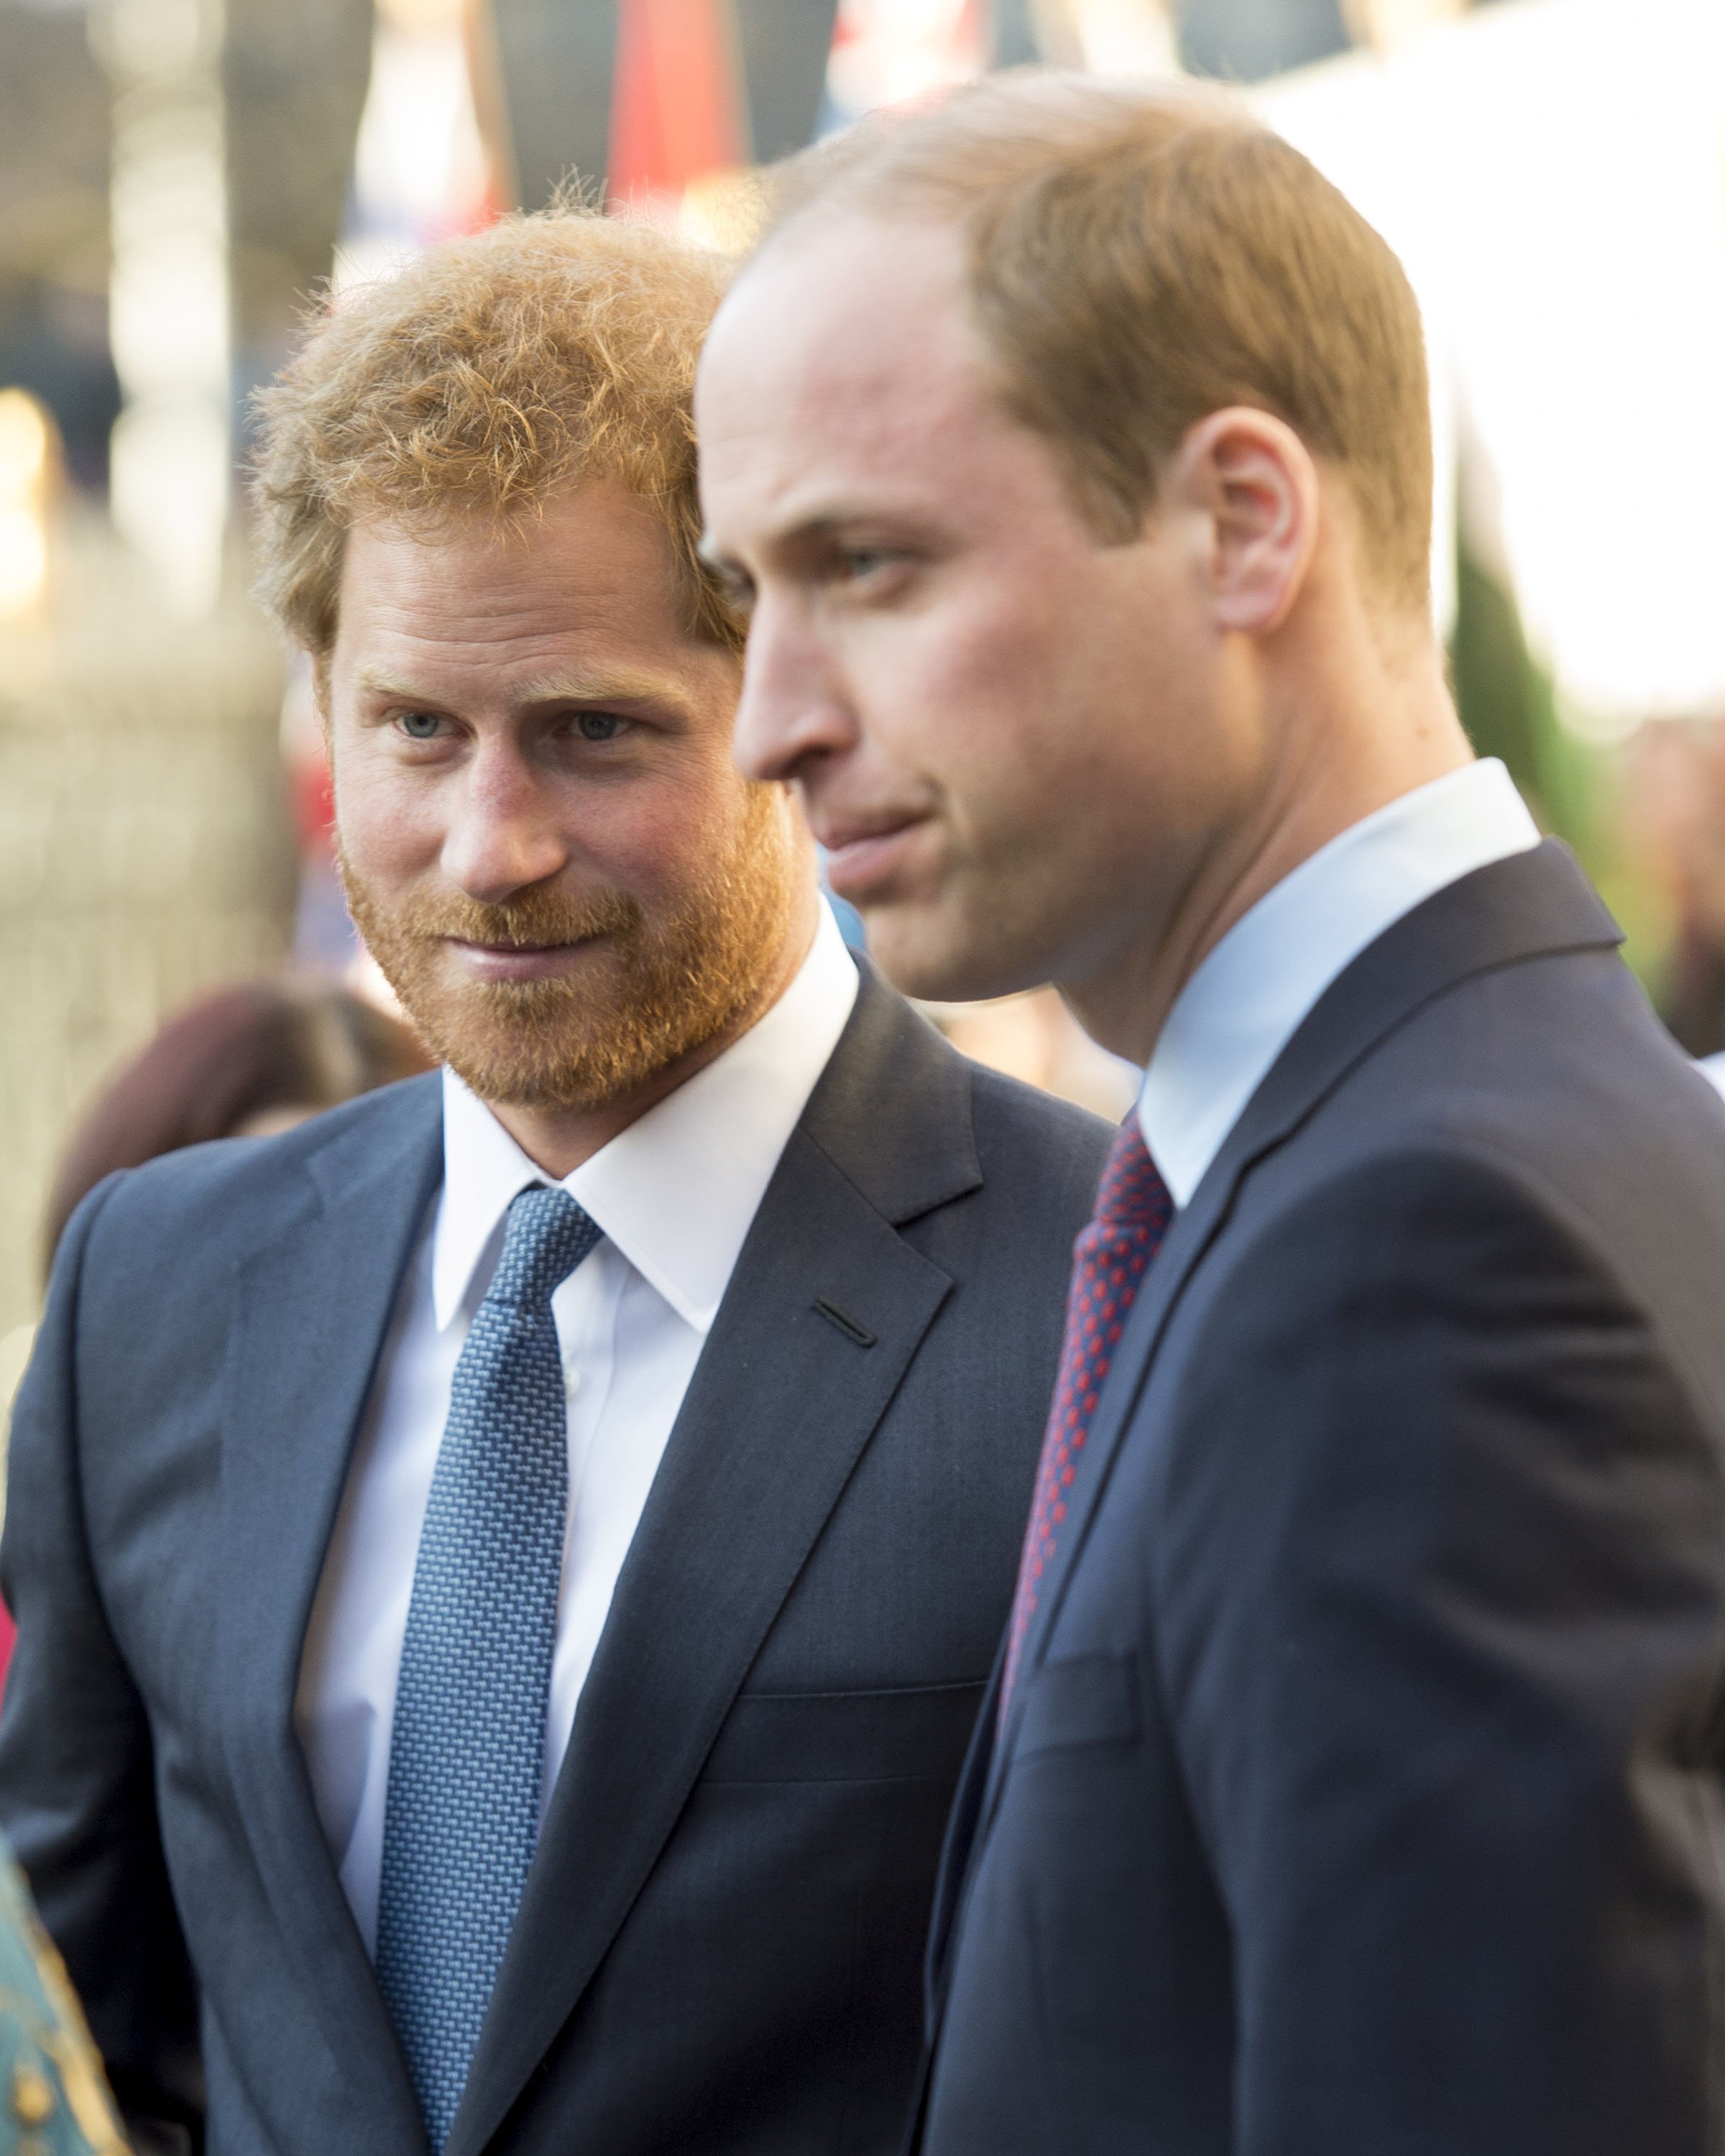 Prince Harry and Prince William in London 2016. | Source: Getty Images